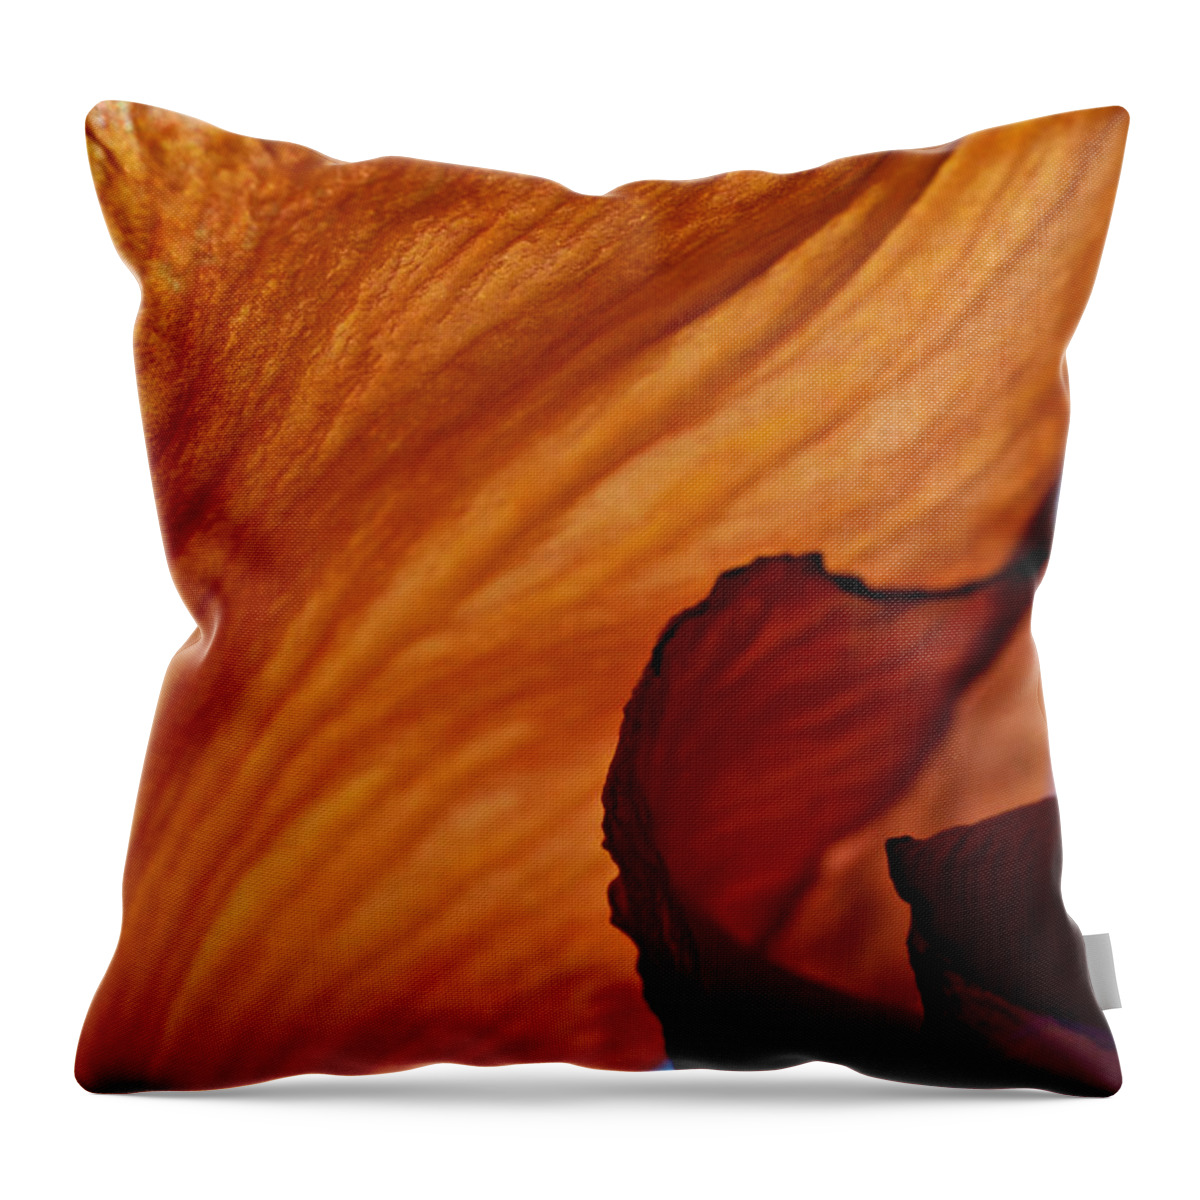 Flower Throw Pillow featuring the photograph Orange Petal Blue Sky by David Resnikoff